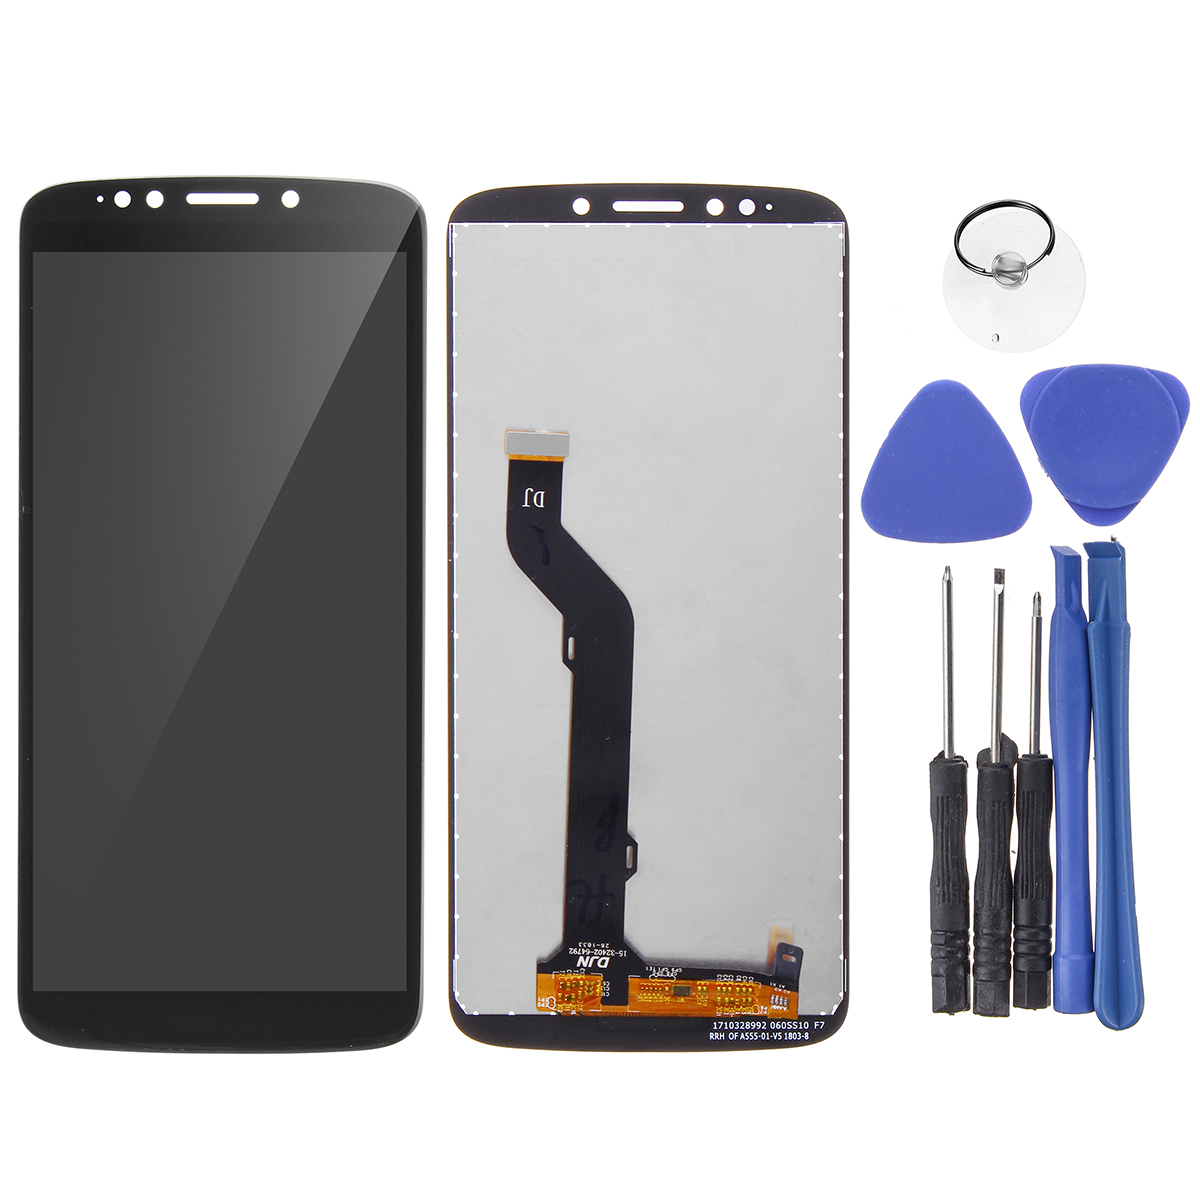 

LCD Display + Touch Screen Digitizer Replacement With Repair Tools For Motorola Moto E5 Plus XT1924-3 XT1924-7